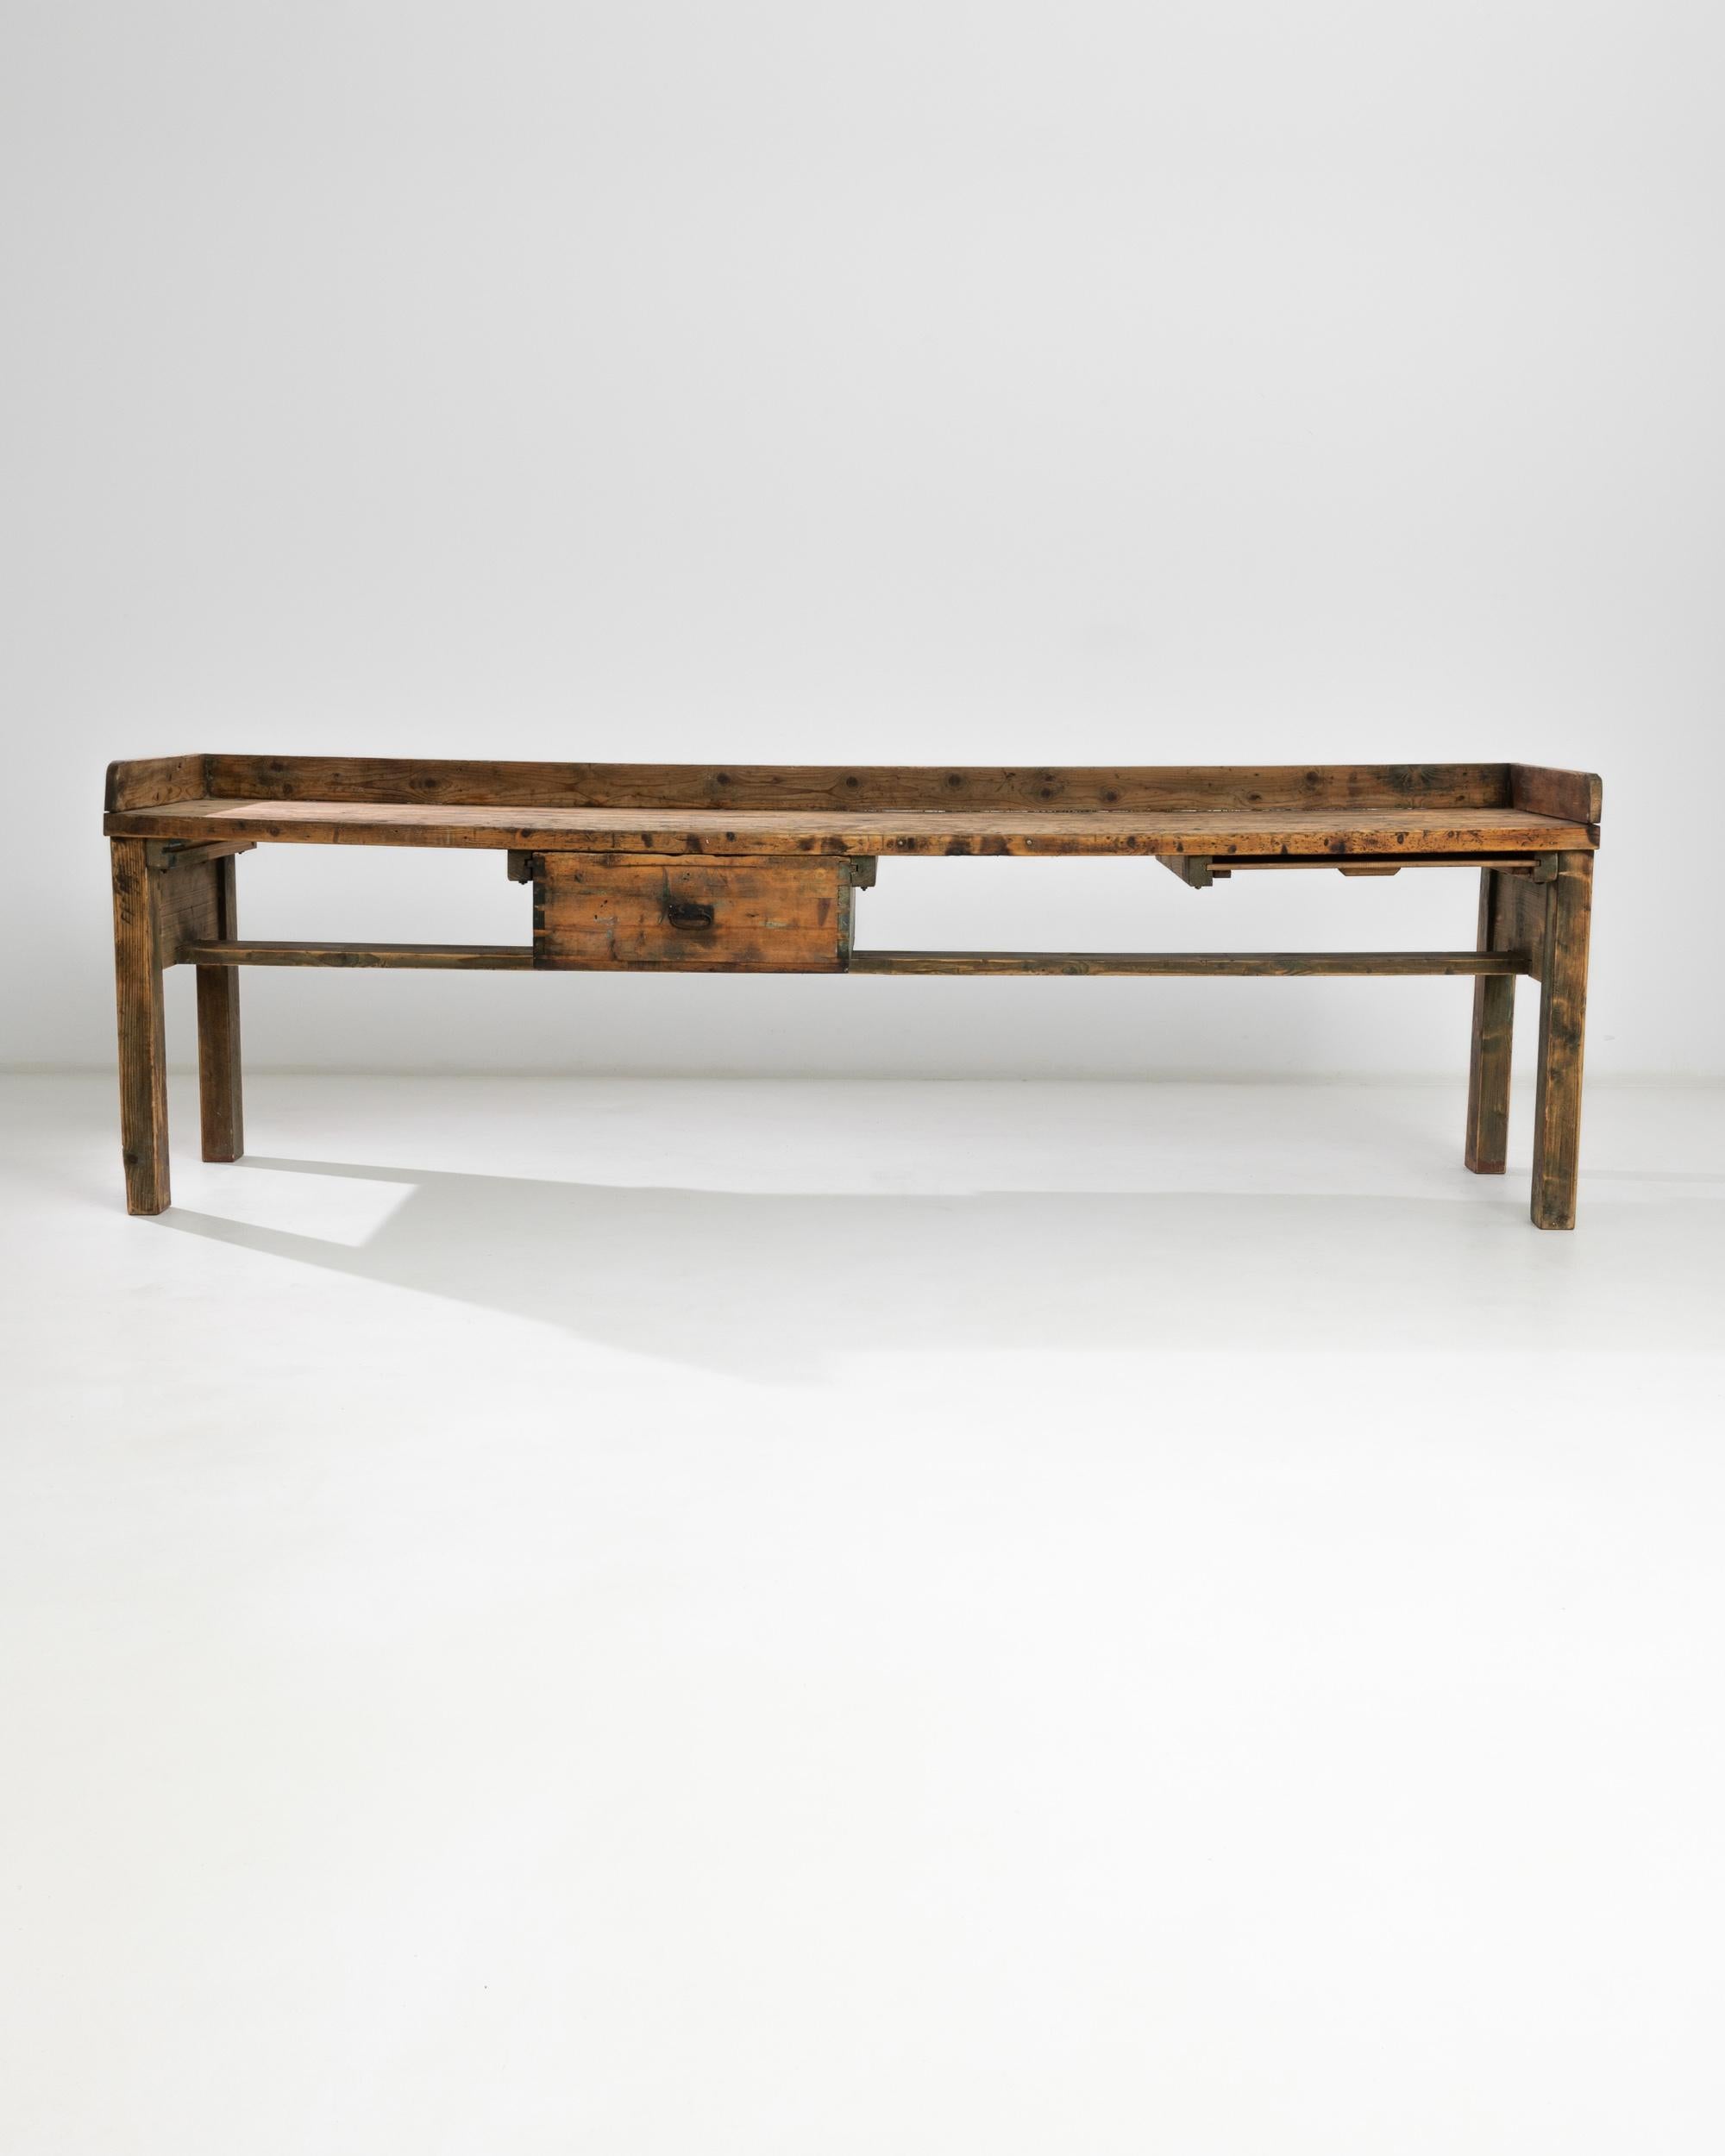 The aged patina of this vintage Industrial work table gives the robust Silhouette a warm glow. Made in Central Europe in the 20th century, the long tabletop sits atop a simple wooden frame; a wooden surround prevents items from being accidentally